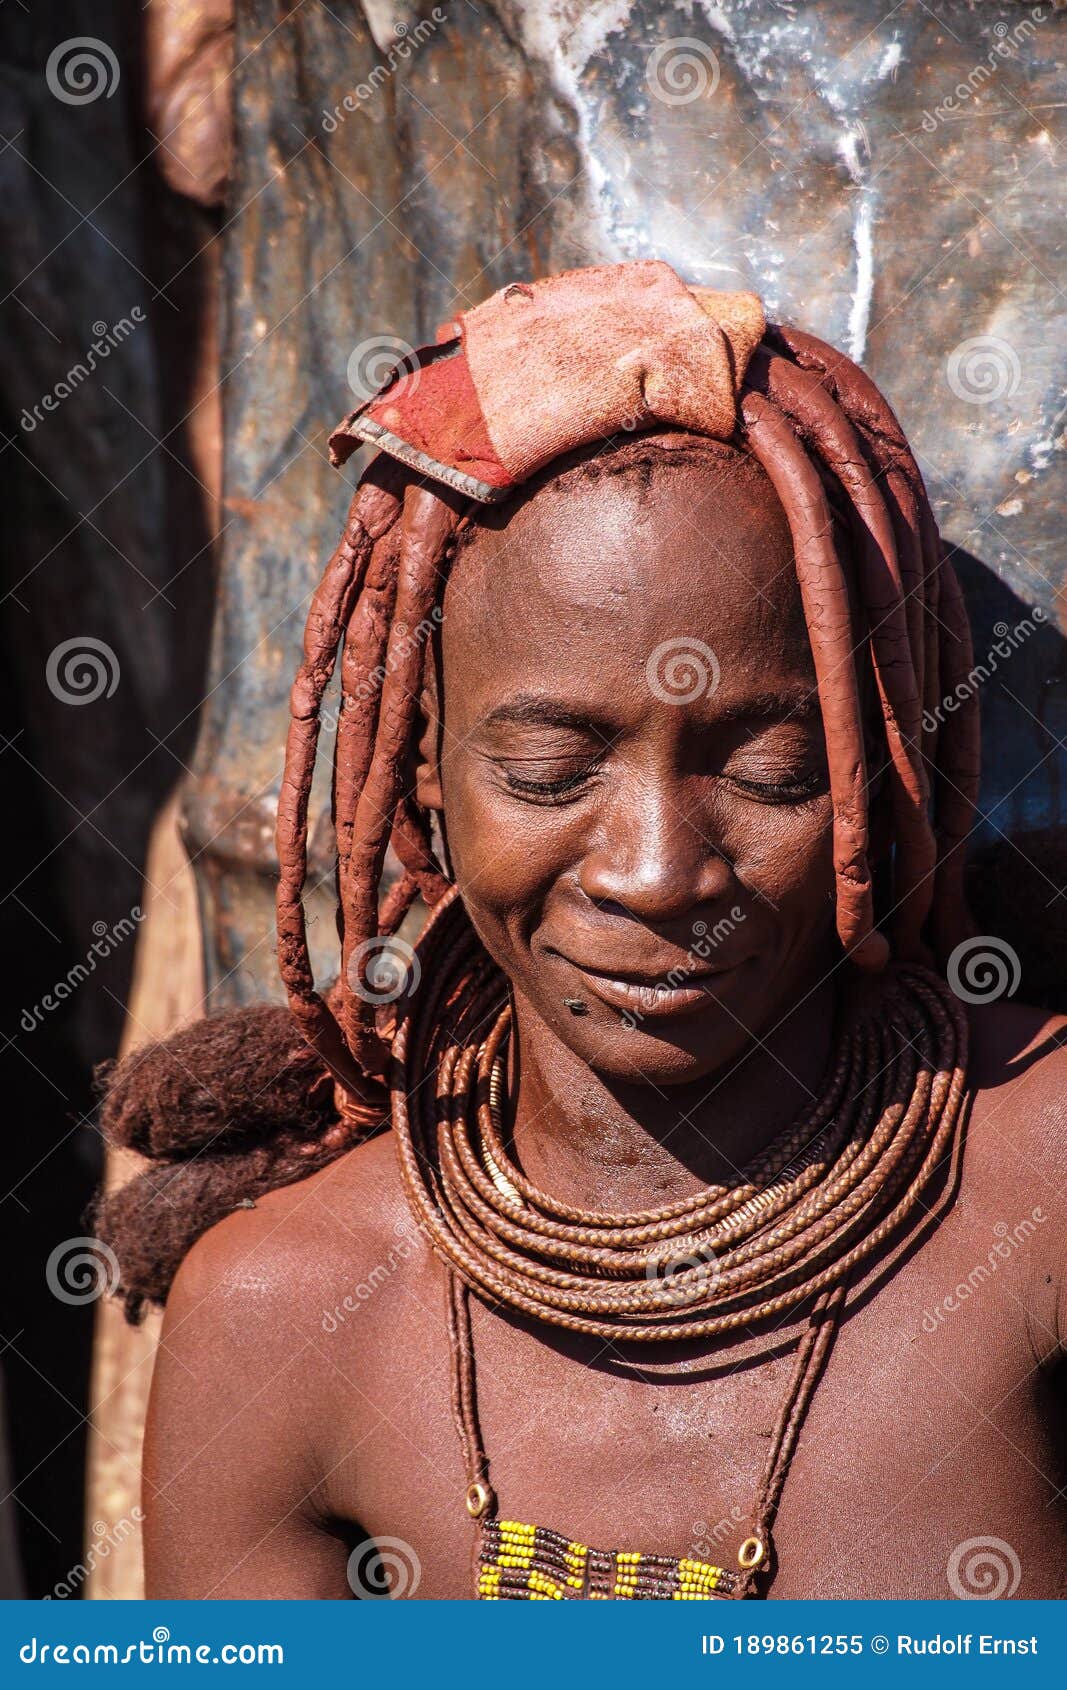 Opuwo Namibia Jul 07 2019 Himba Woman With The Typical Necklace 